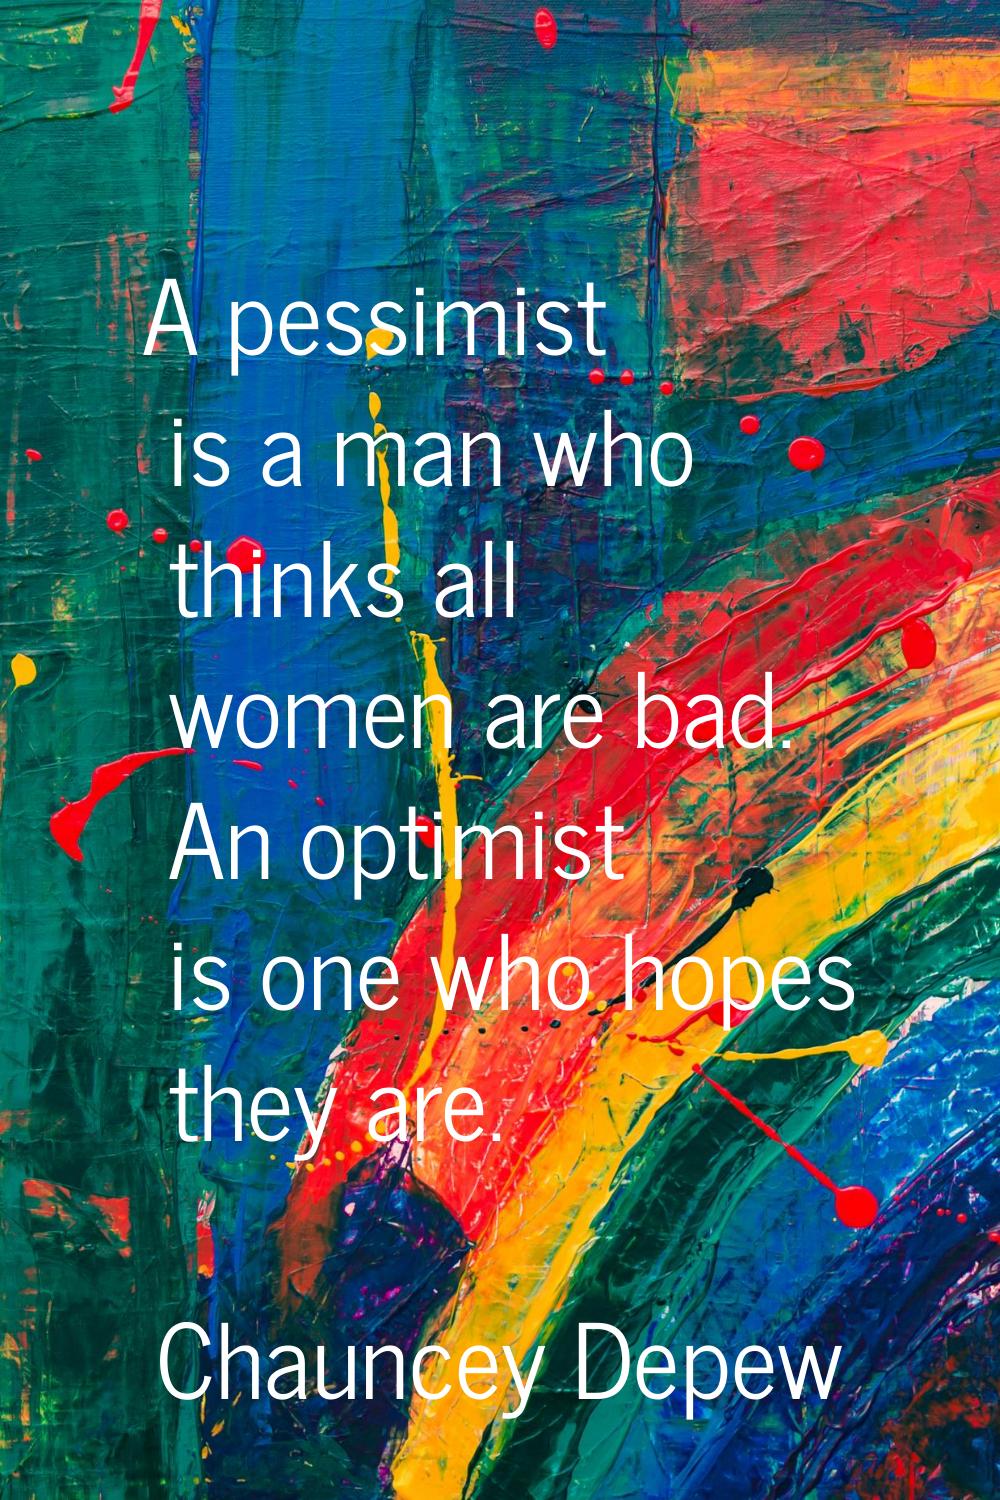 A pessimist is a man who thinks all women are bad. An optimist is one who hopes they are.